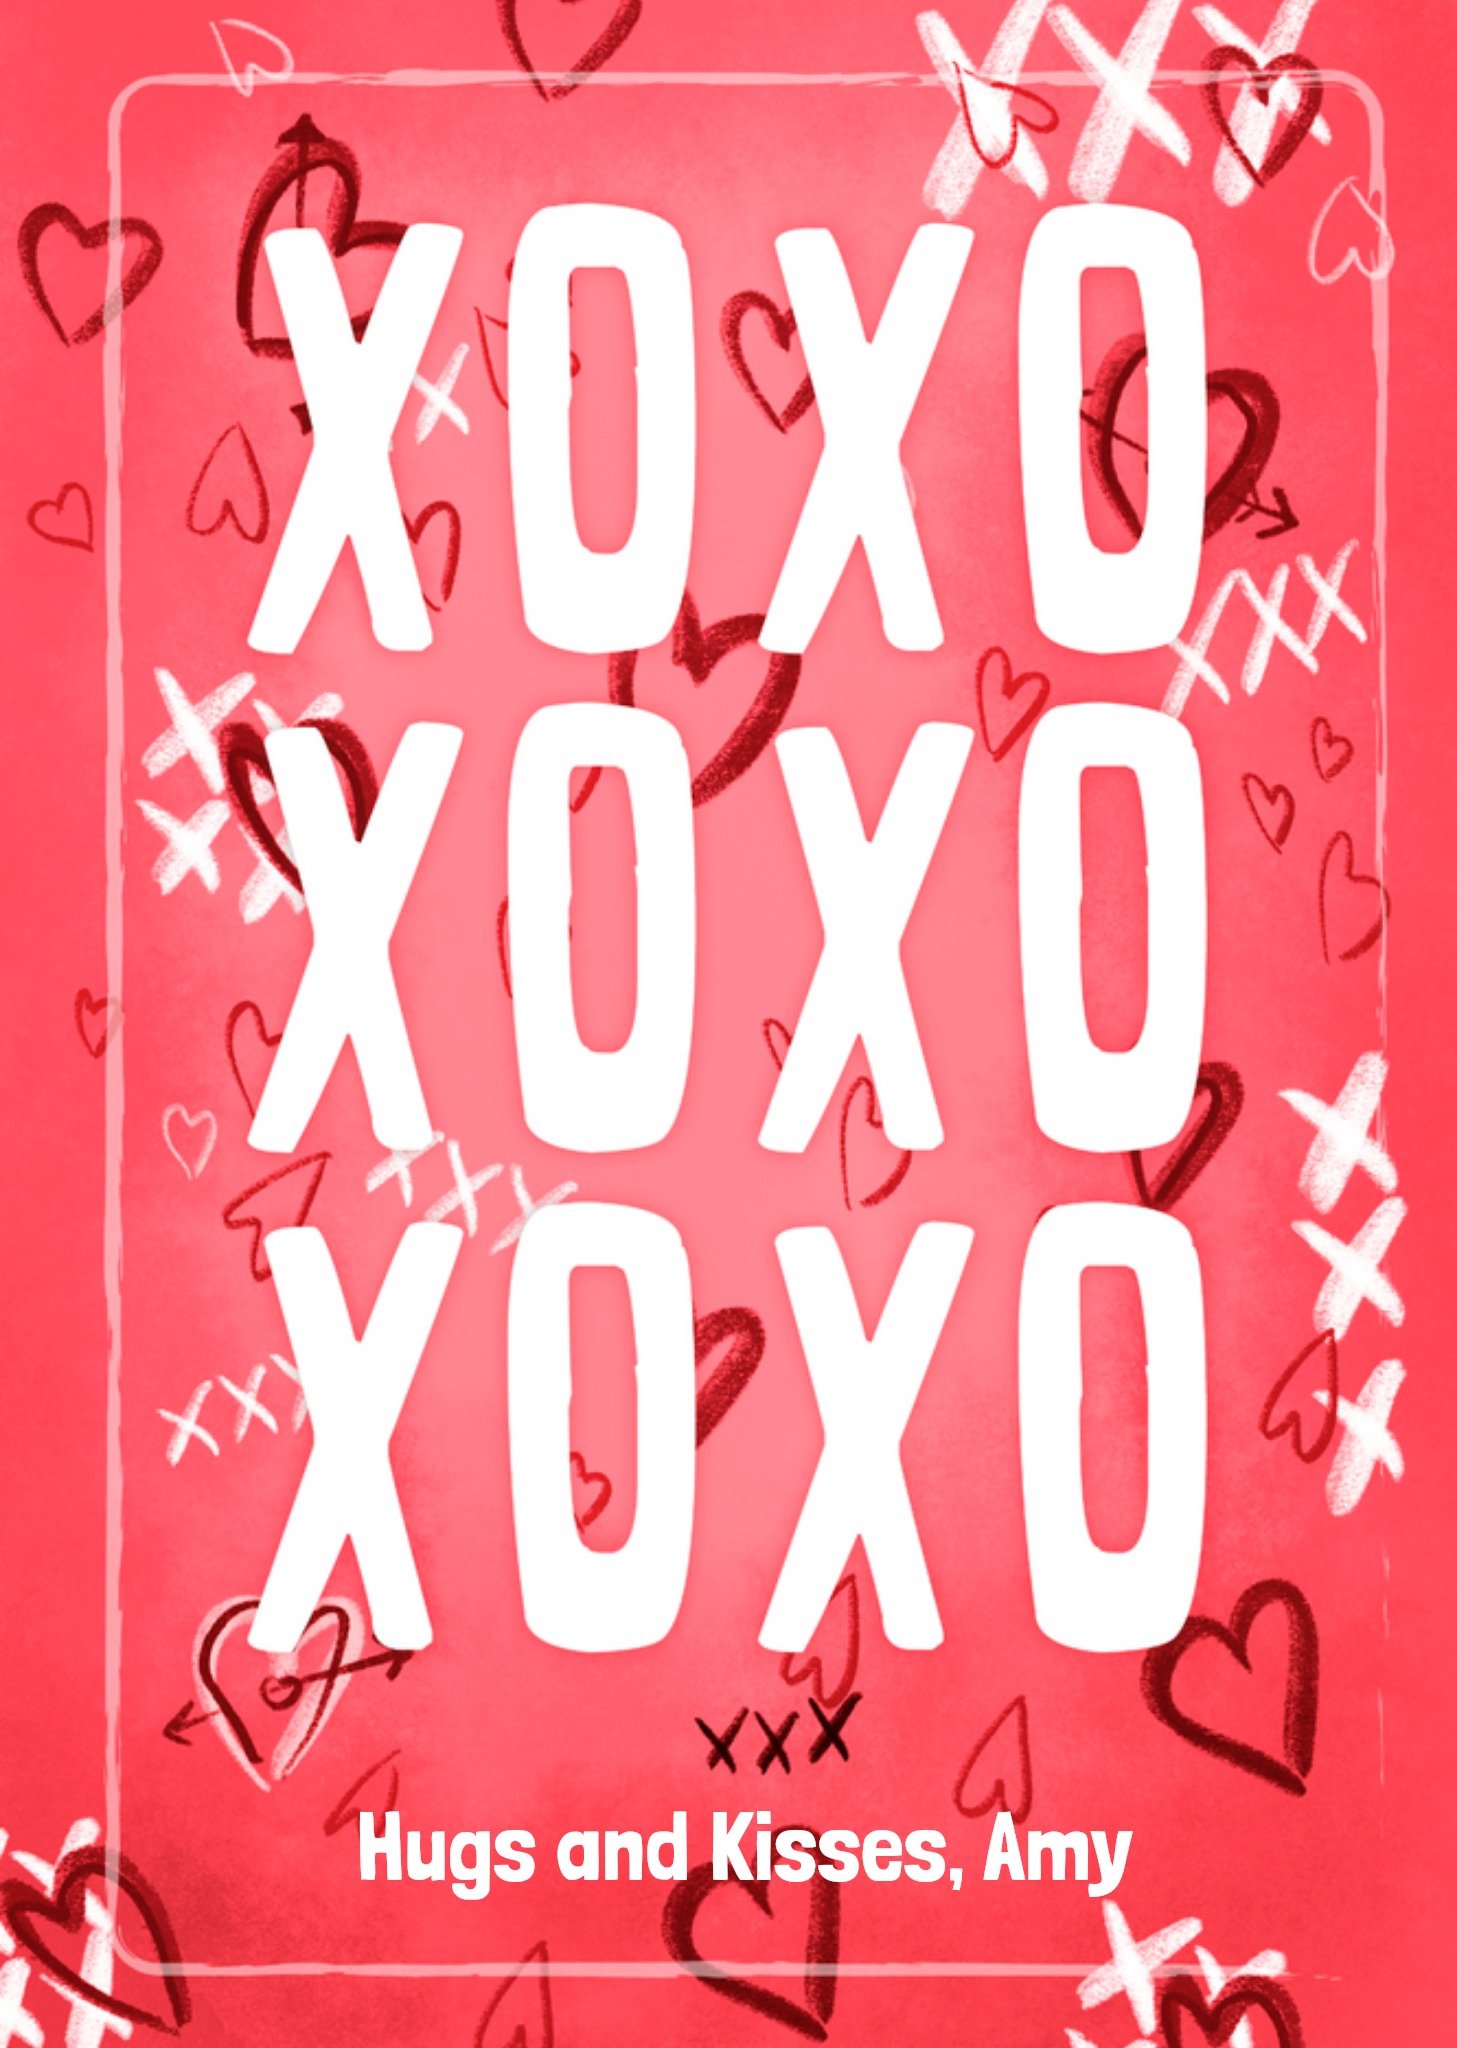 Moonpig Fishuals Xoxo Hugs And Kisses Typography Valentine's Day Card, Large